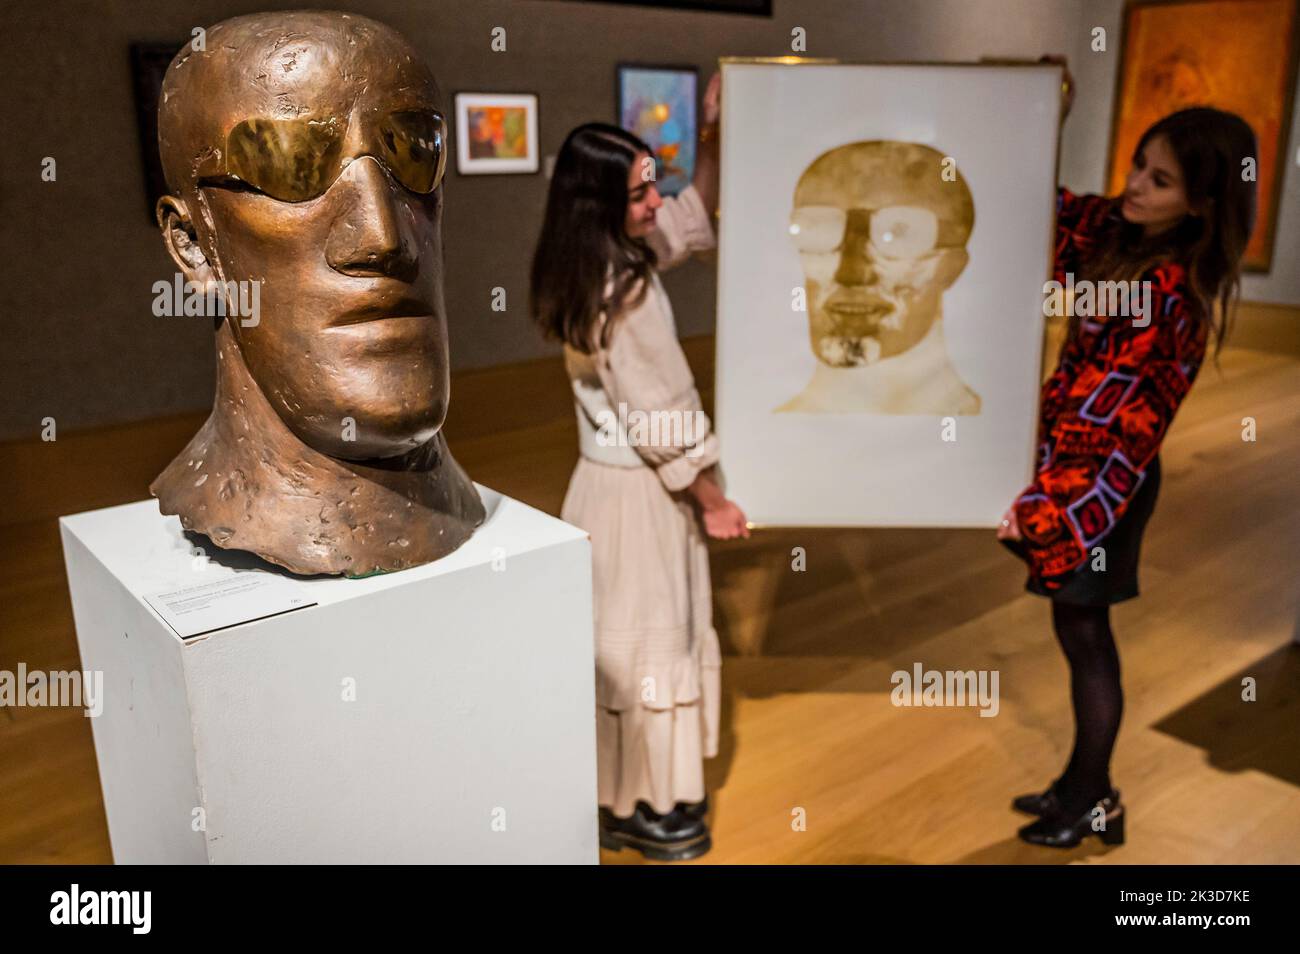 London, UK. 26th Sep, 2022. Head by Elisabeth Frink, estimated at £70,000-100,000 with Goggled Herad, also by her, ewst £1000-1500 - The Blazing a Trail: Modern British Women sale at Bonhams New Bond Street. The aim of which is to introduce collectors to the wealth of British 20th century women artists. The sale itself will take place on 28 September in London Credit: Guy Bell/Alamy Live News Stock Photo